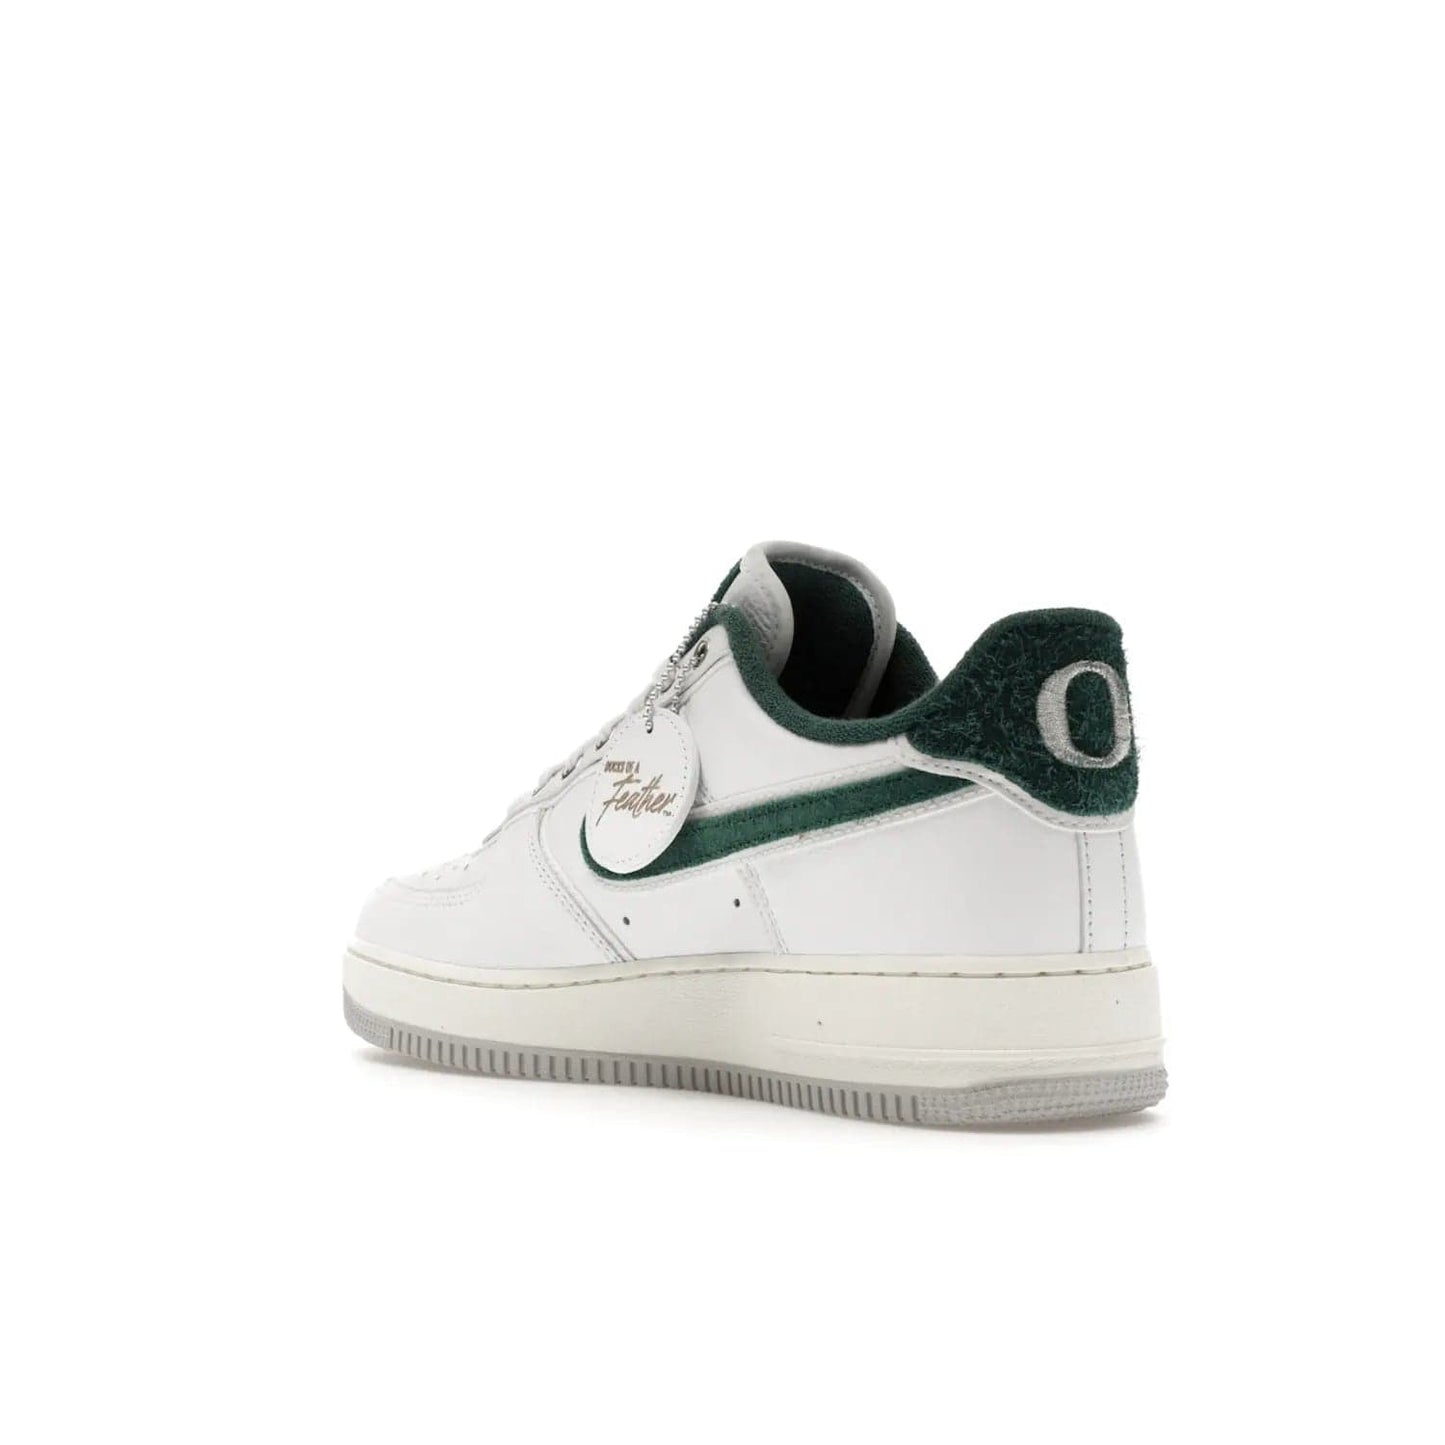 Nike Air Force 1 Low '07 Premium University of Oregon PE - Image 24 - Only at www.BallersClubKickz.com - The Nike Air Force 1 Low '07 Premium. Special Oregon University colorway. White base with green and sail accents. Cushioned rubber midsole. Comfort and style. Support your school!